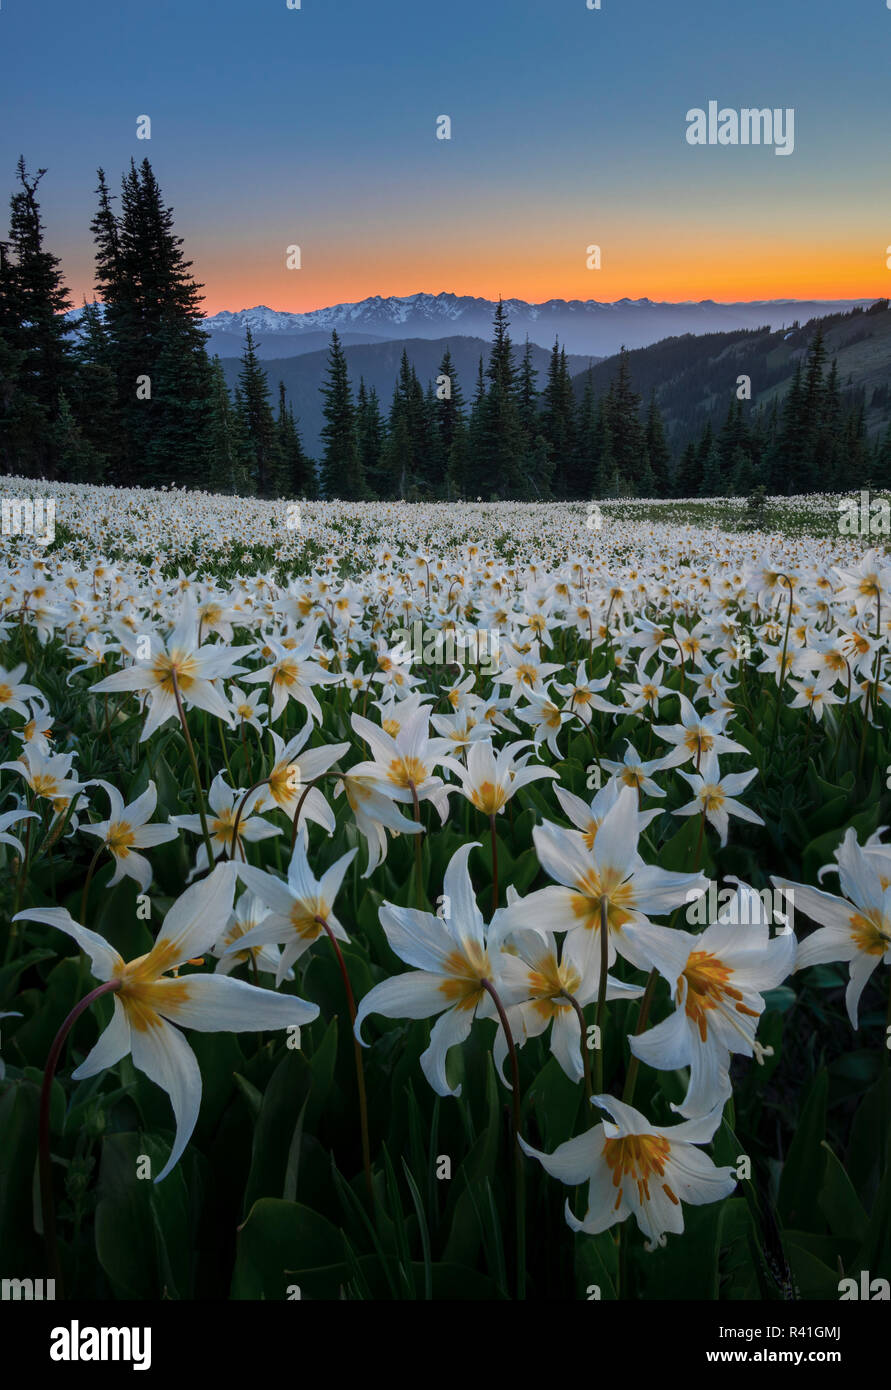 USA, Washington State. Field of Avalanche Lily (Erythronium montanum) in subalpine meadow at sunset at Olympic National Park. Stock Photo